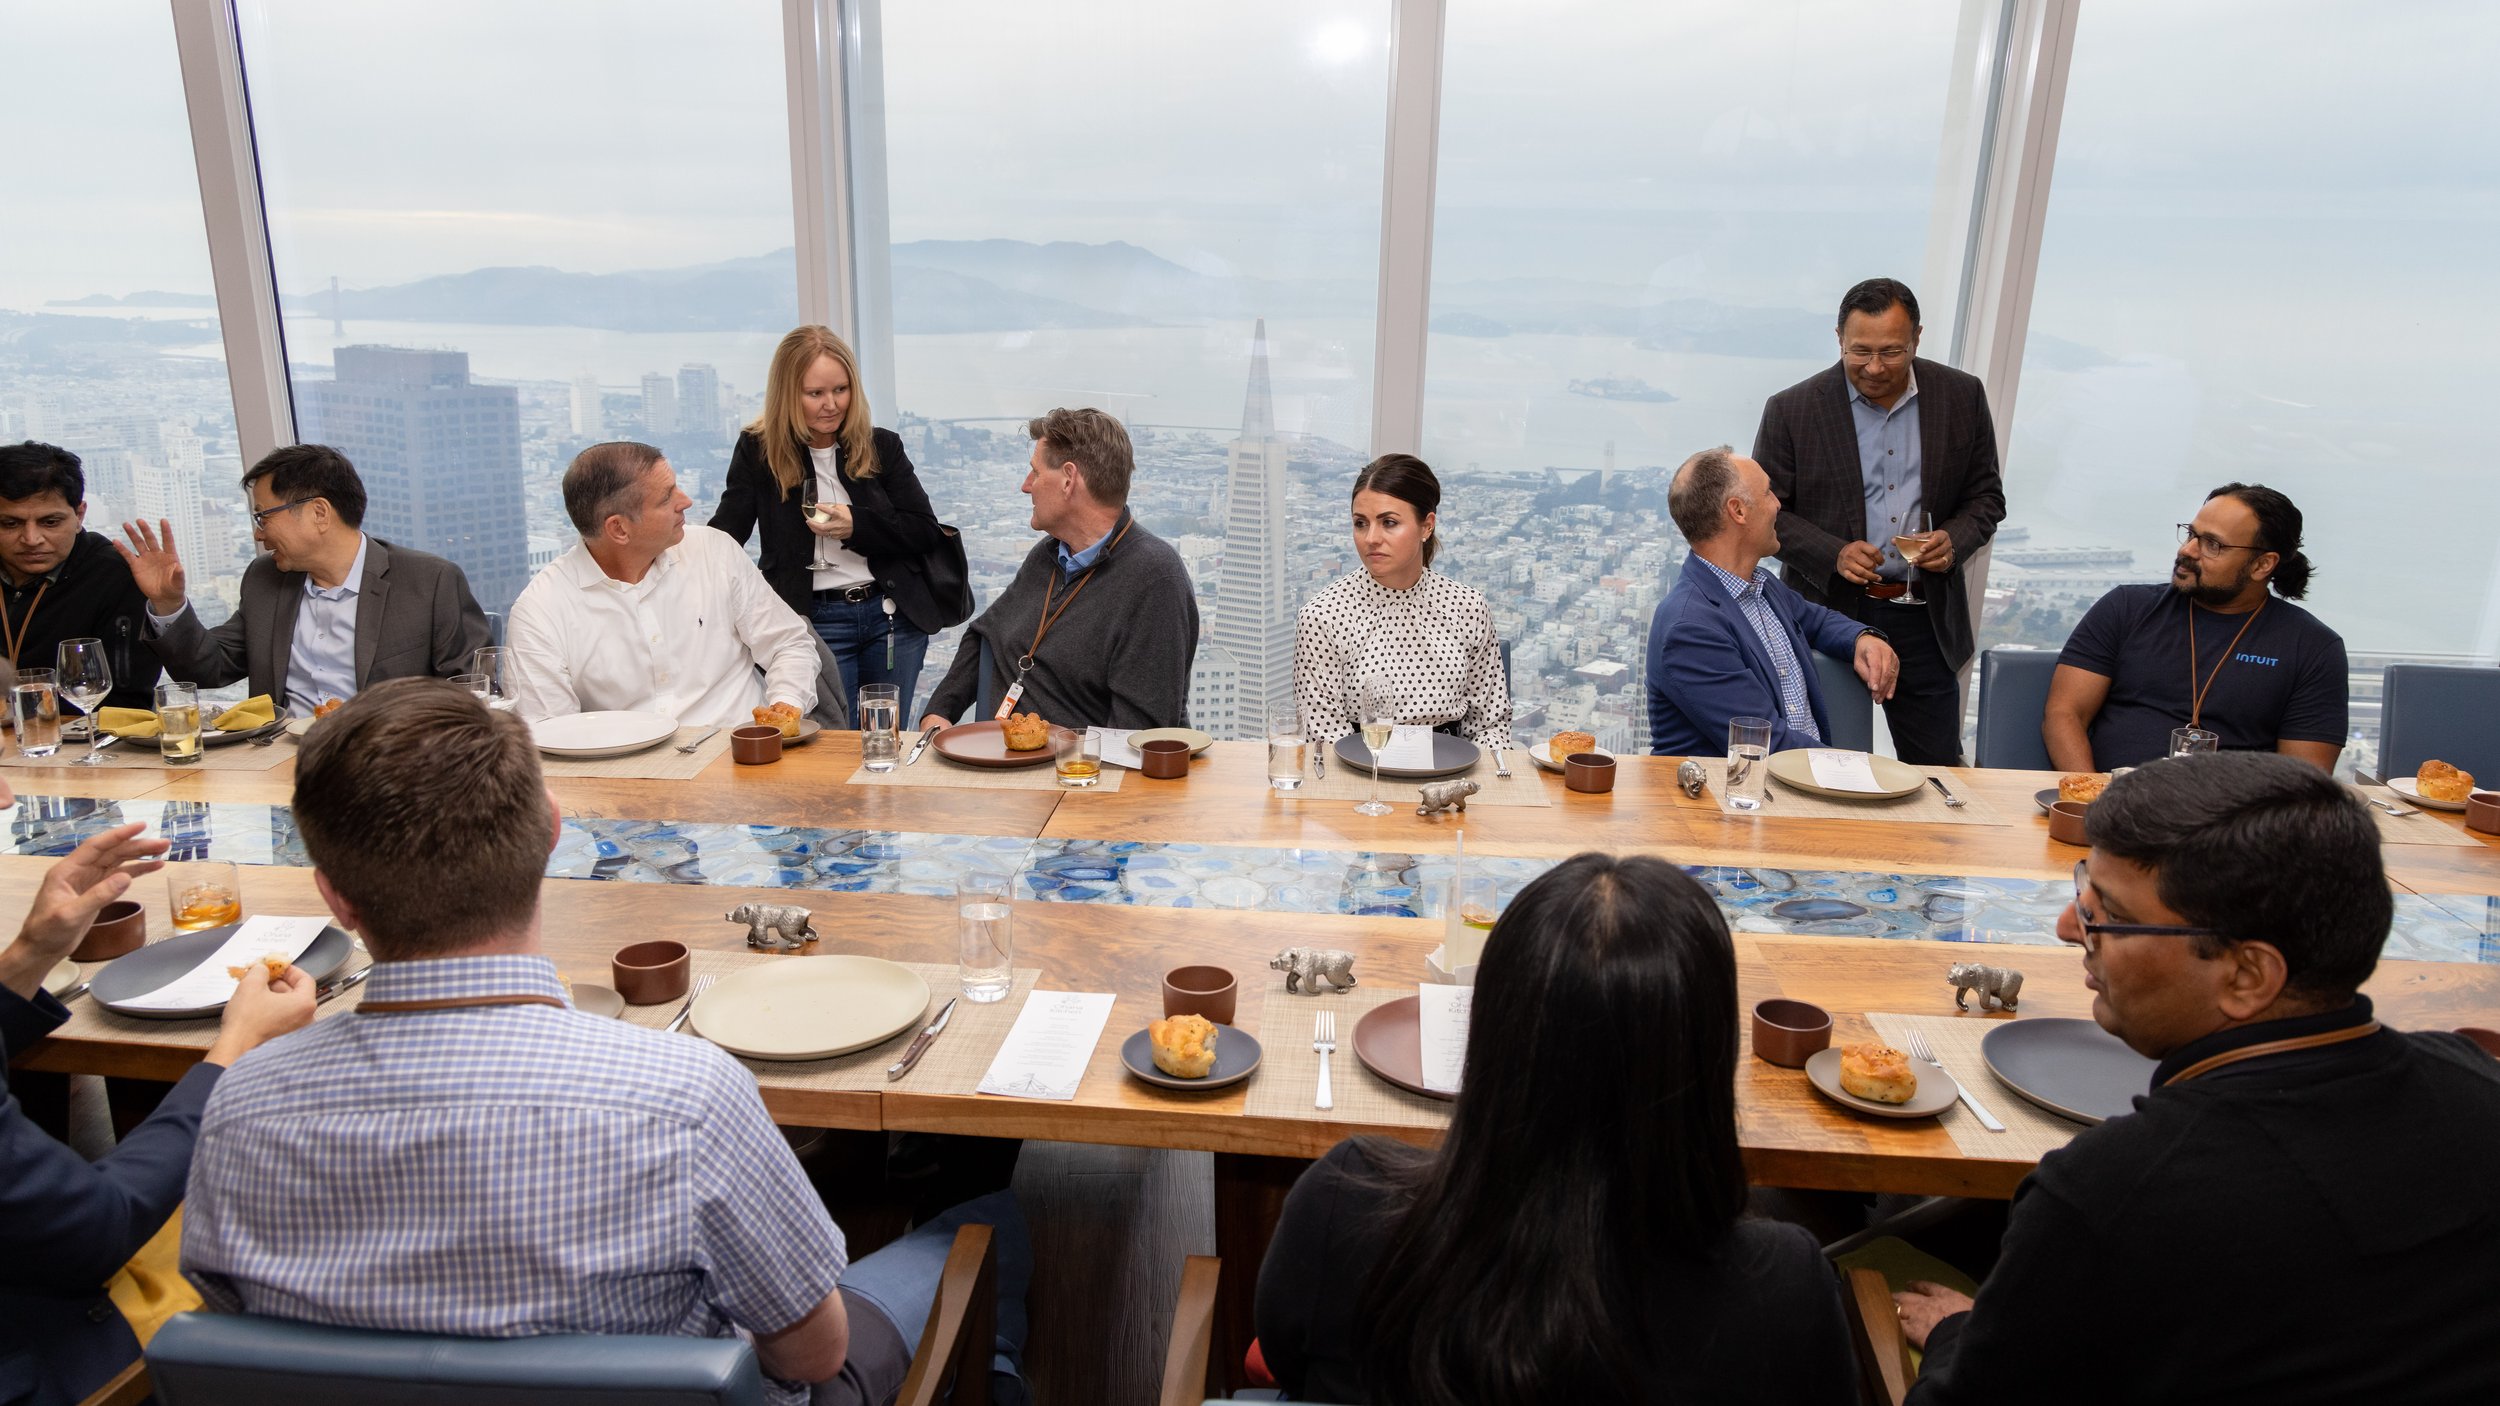 Fine Dining at Salesforce Tower Event Photography.jpg